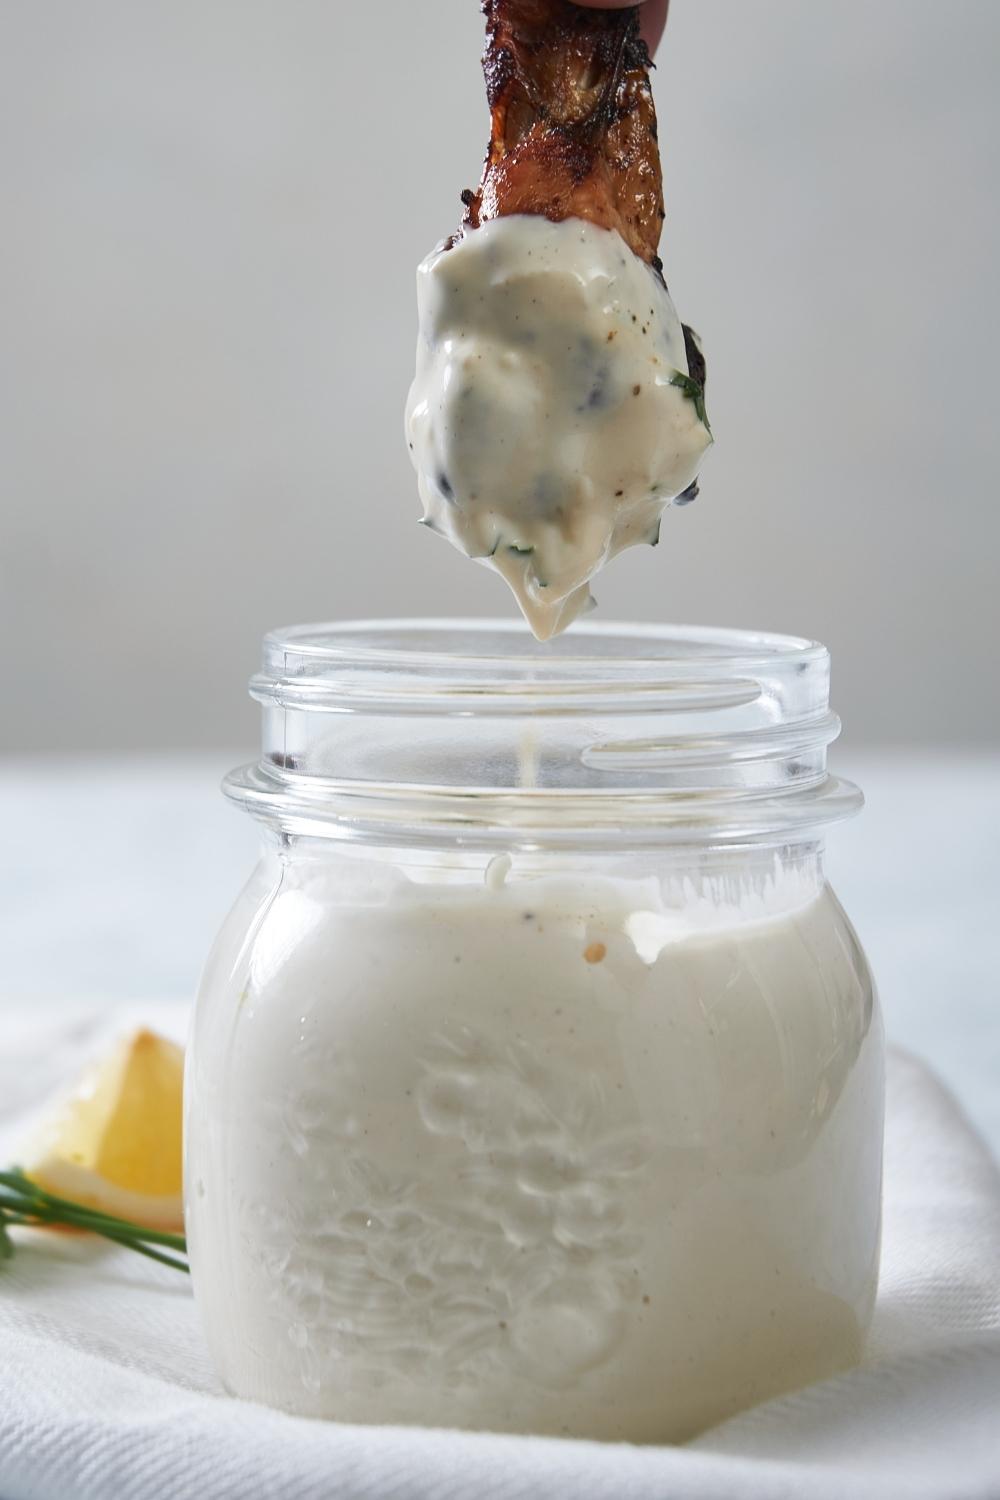 A small mason jar with homemade Alabama white sauce in it. A chicken wing has just been dipped into it and is suspended over top of the jar.